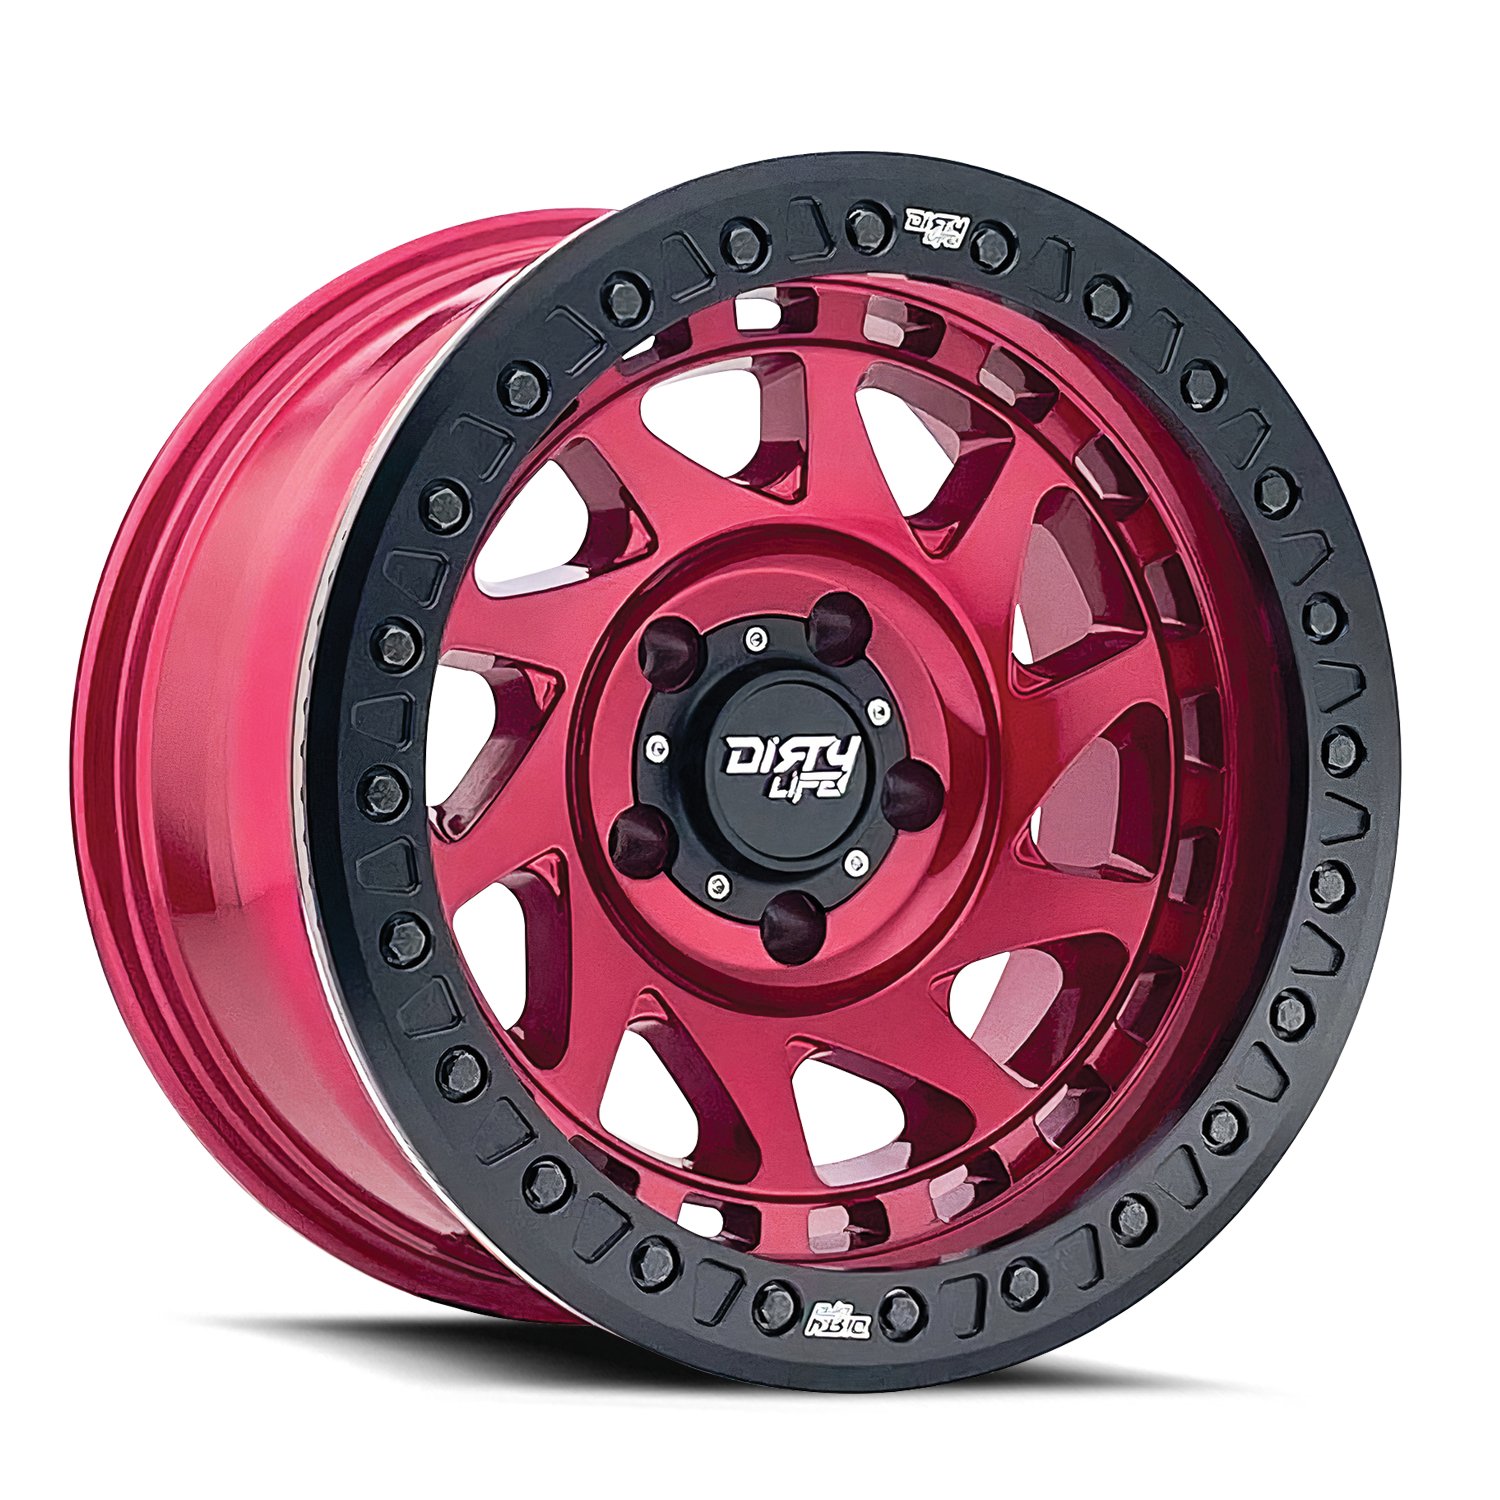 ENIGMA RACE 9313 Wheel Size: 17 X 9" Bolt Pattern: 6-135 [CRIMSON CANDY RED]